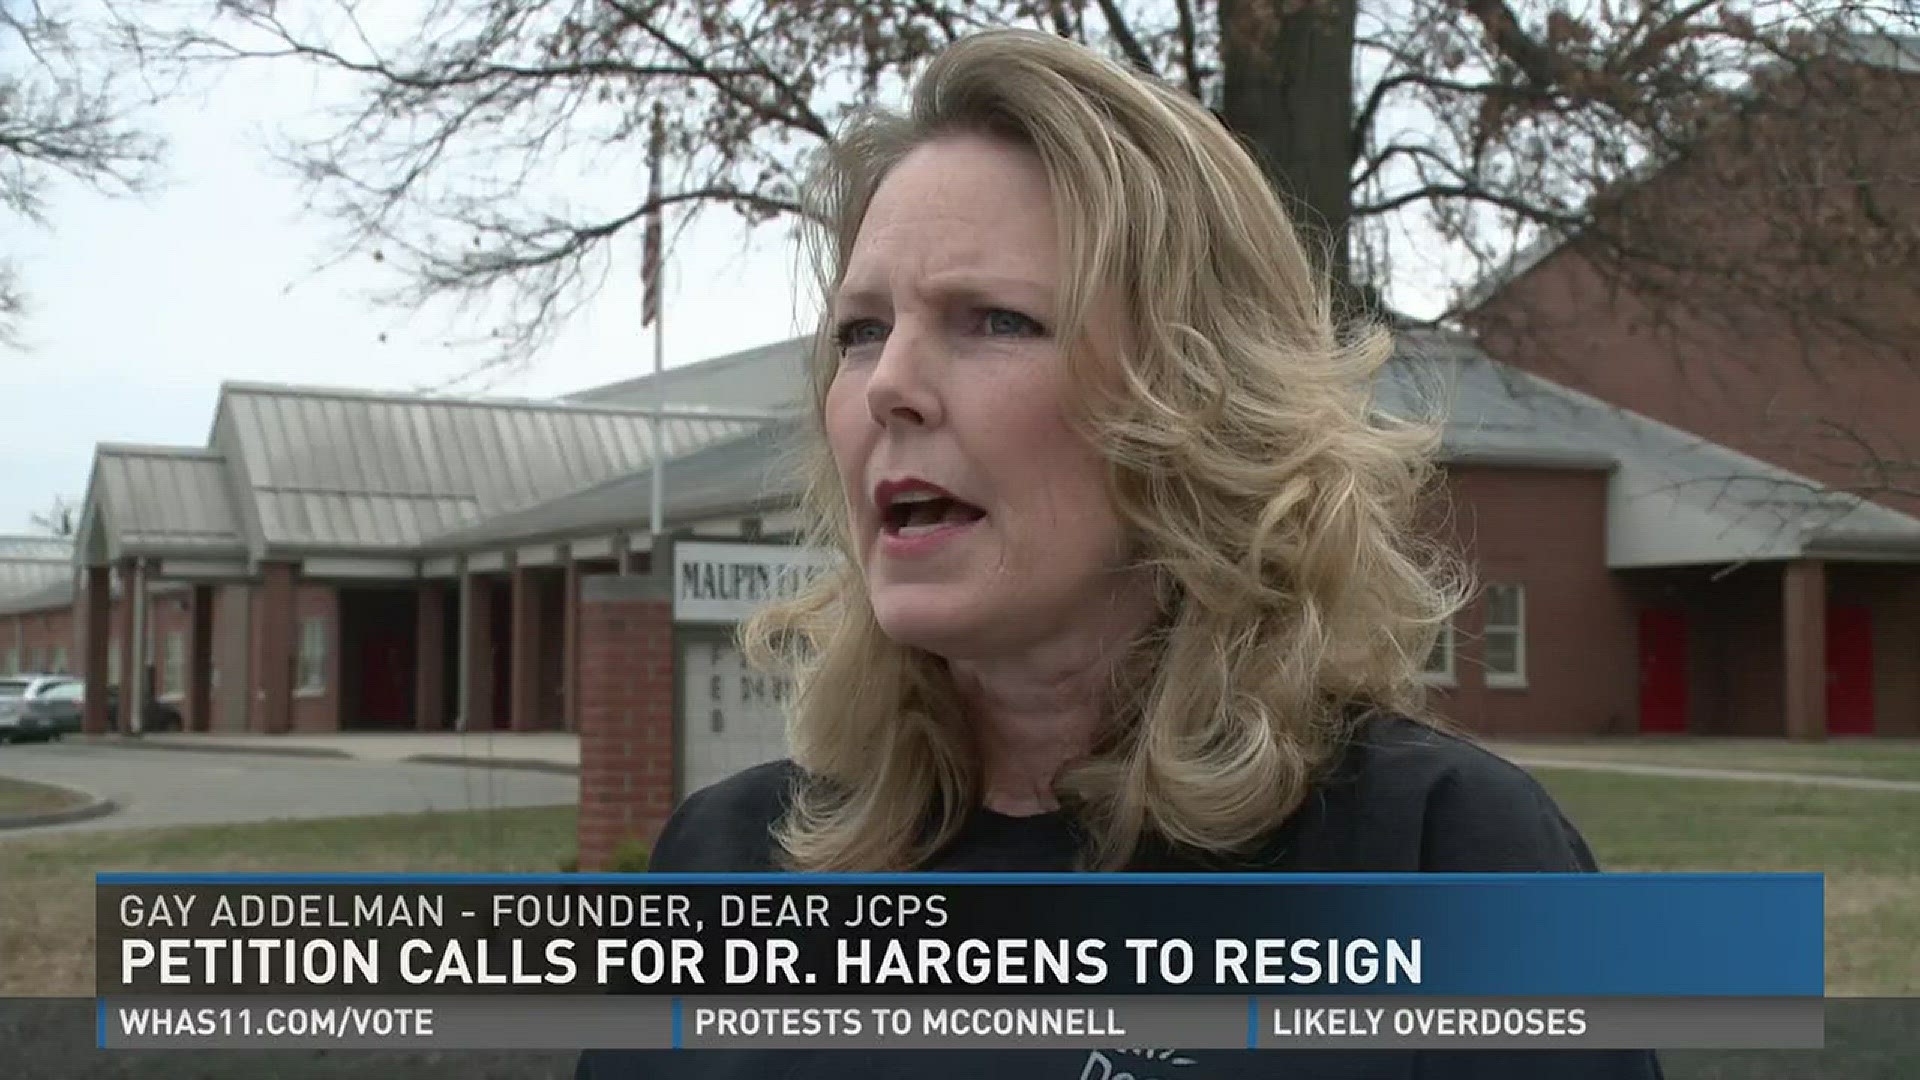 Petition calls for Dr. Hargens to resign